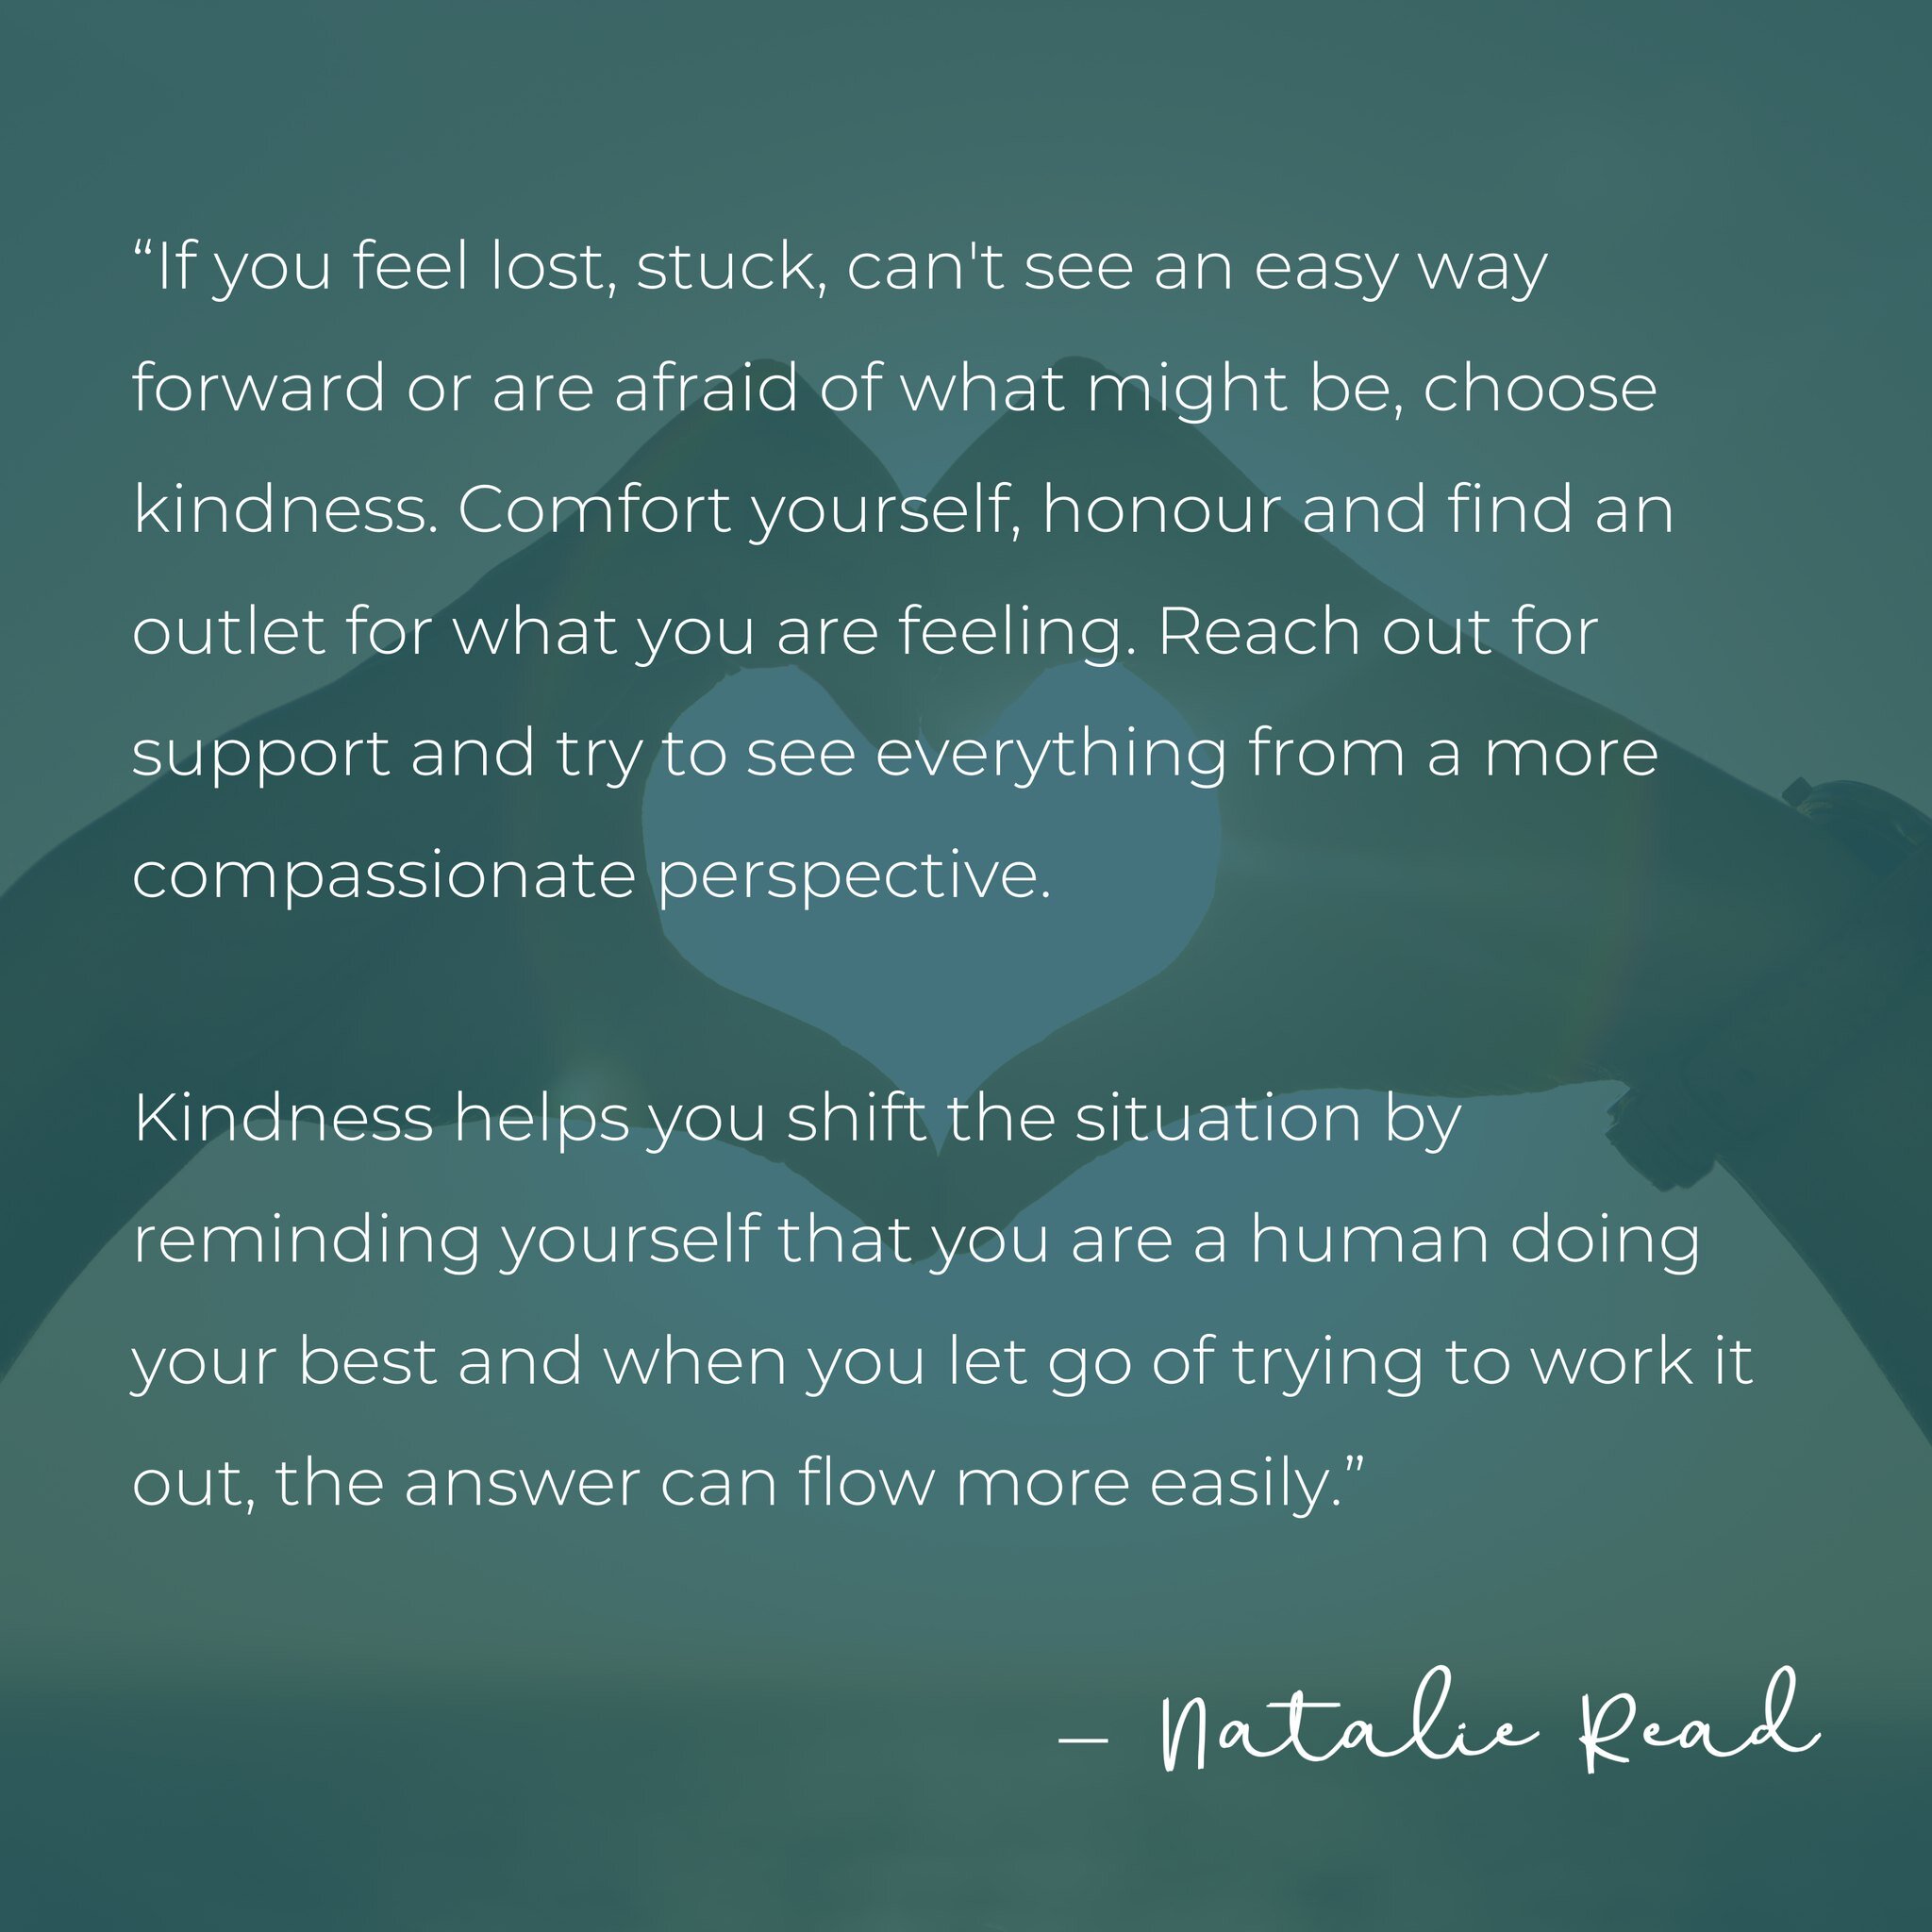 &ldquo;If you feel lost, stuck, can't see an easy way forward or are afraid of what might be, choose kindness. Comfort yourself, honour and find an outlet for what you are feeling. Reach out for support and try to see everything from a more compassio